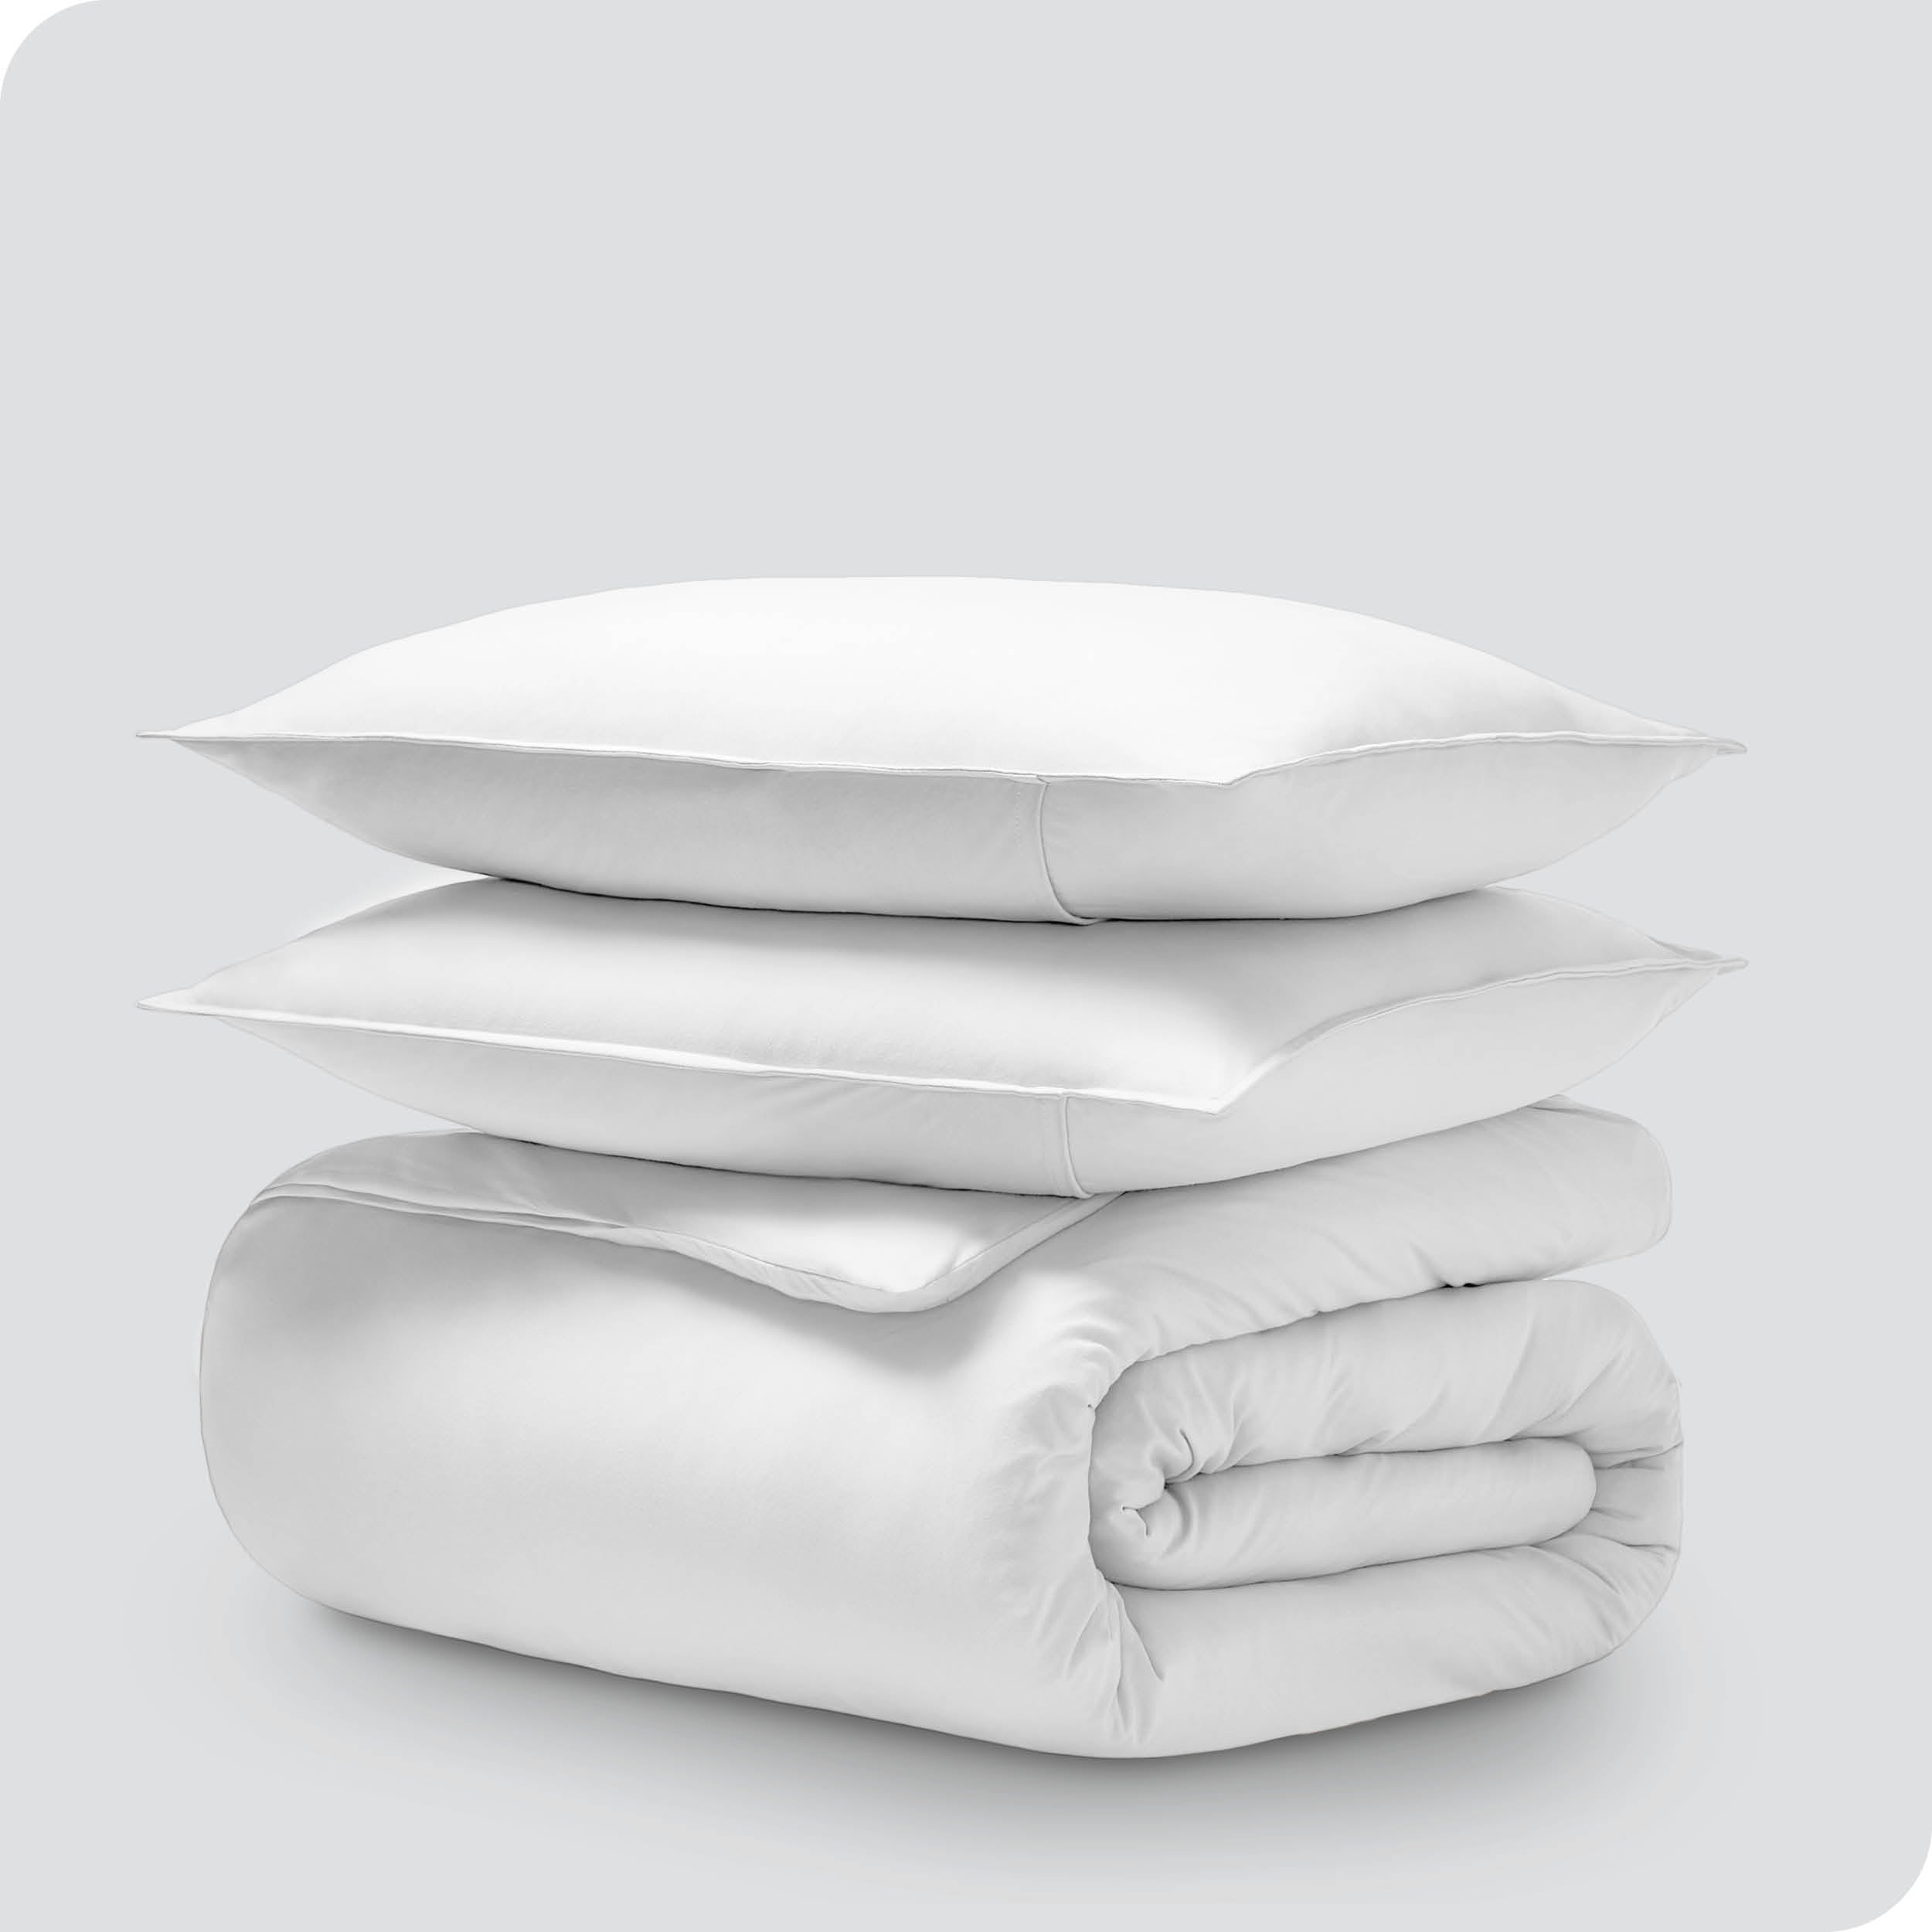 Duvet cover and shams stacked